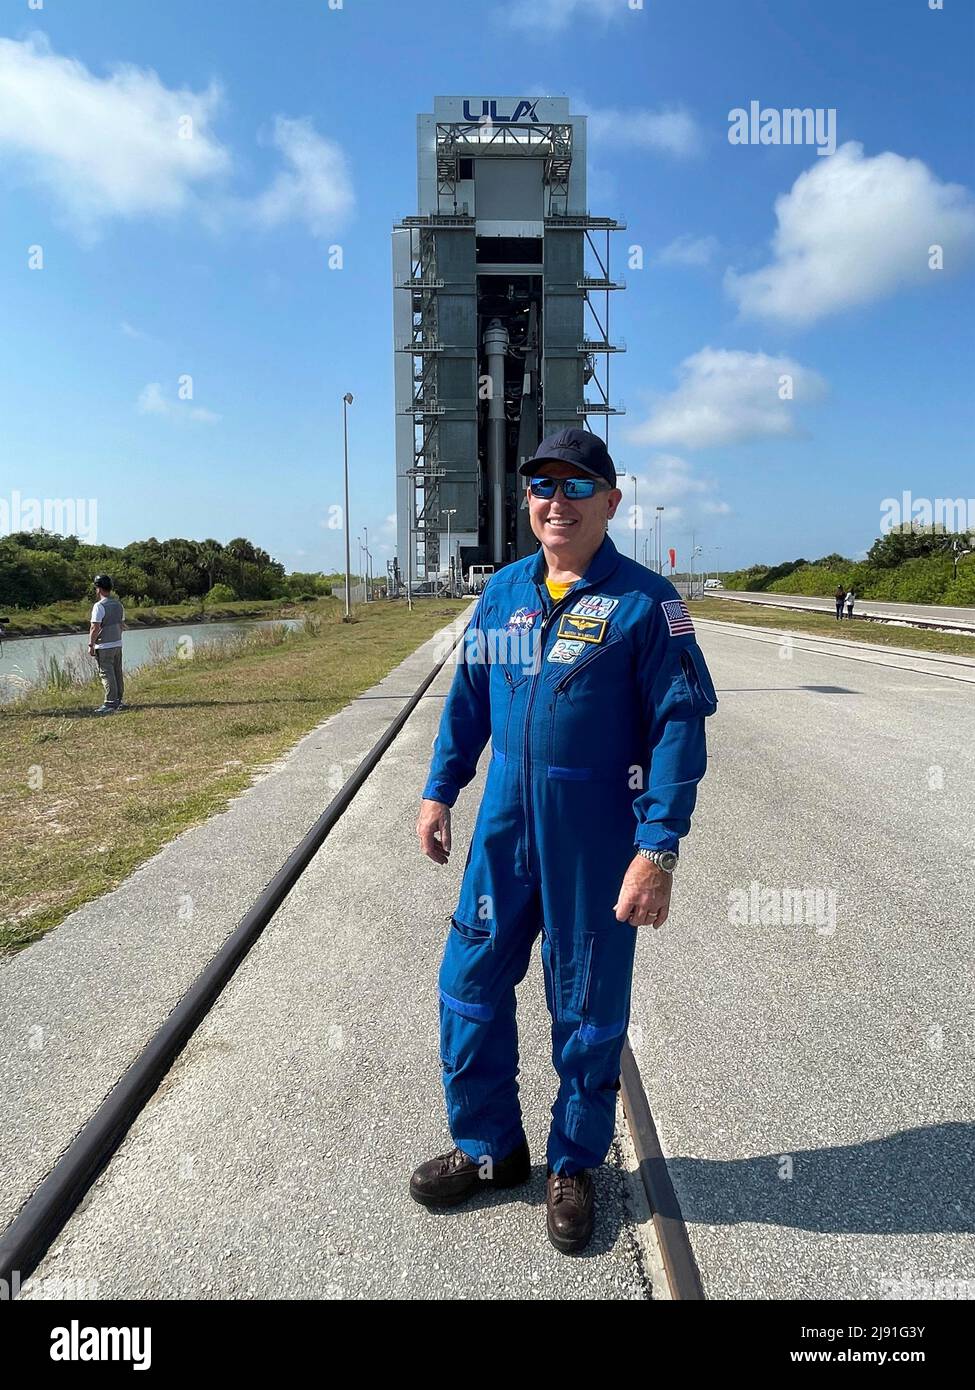 Cape Canaveral, United States of America. 19 May, 2022. NASA astronaut Barry “Butch' Wilmore poses on the Launch Pad ahead of the launch of the United Launch Alliance Atlas V rocket carrying the Boeing CST-100 Starliner spacecraft aboard at the Kennedy Space Center, May 18, 2022 in Cape Canaveral, Florida. The Orbital Flight Test-2 will be second un-crewed flight test and will dock to the International Space Station and is expected to lift off May 19th. Credit: Joel Kowsky/NASA/Alamy Live News Stock Photo